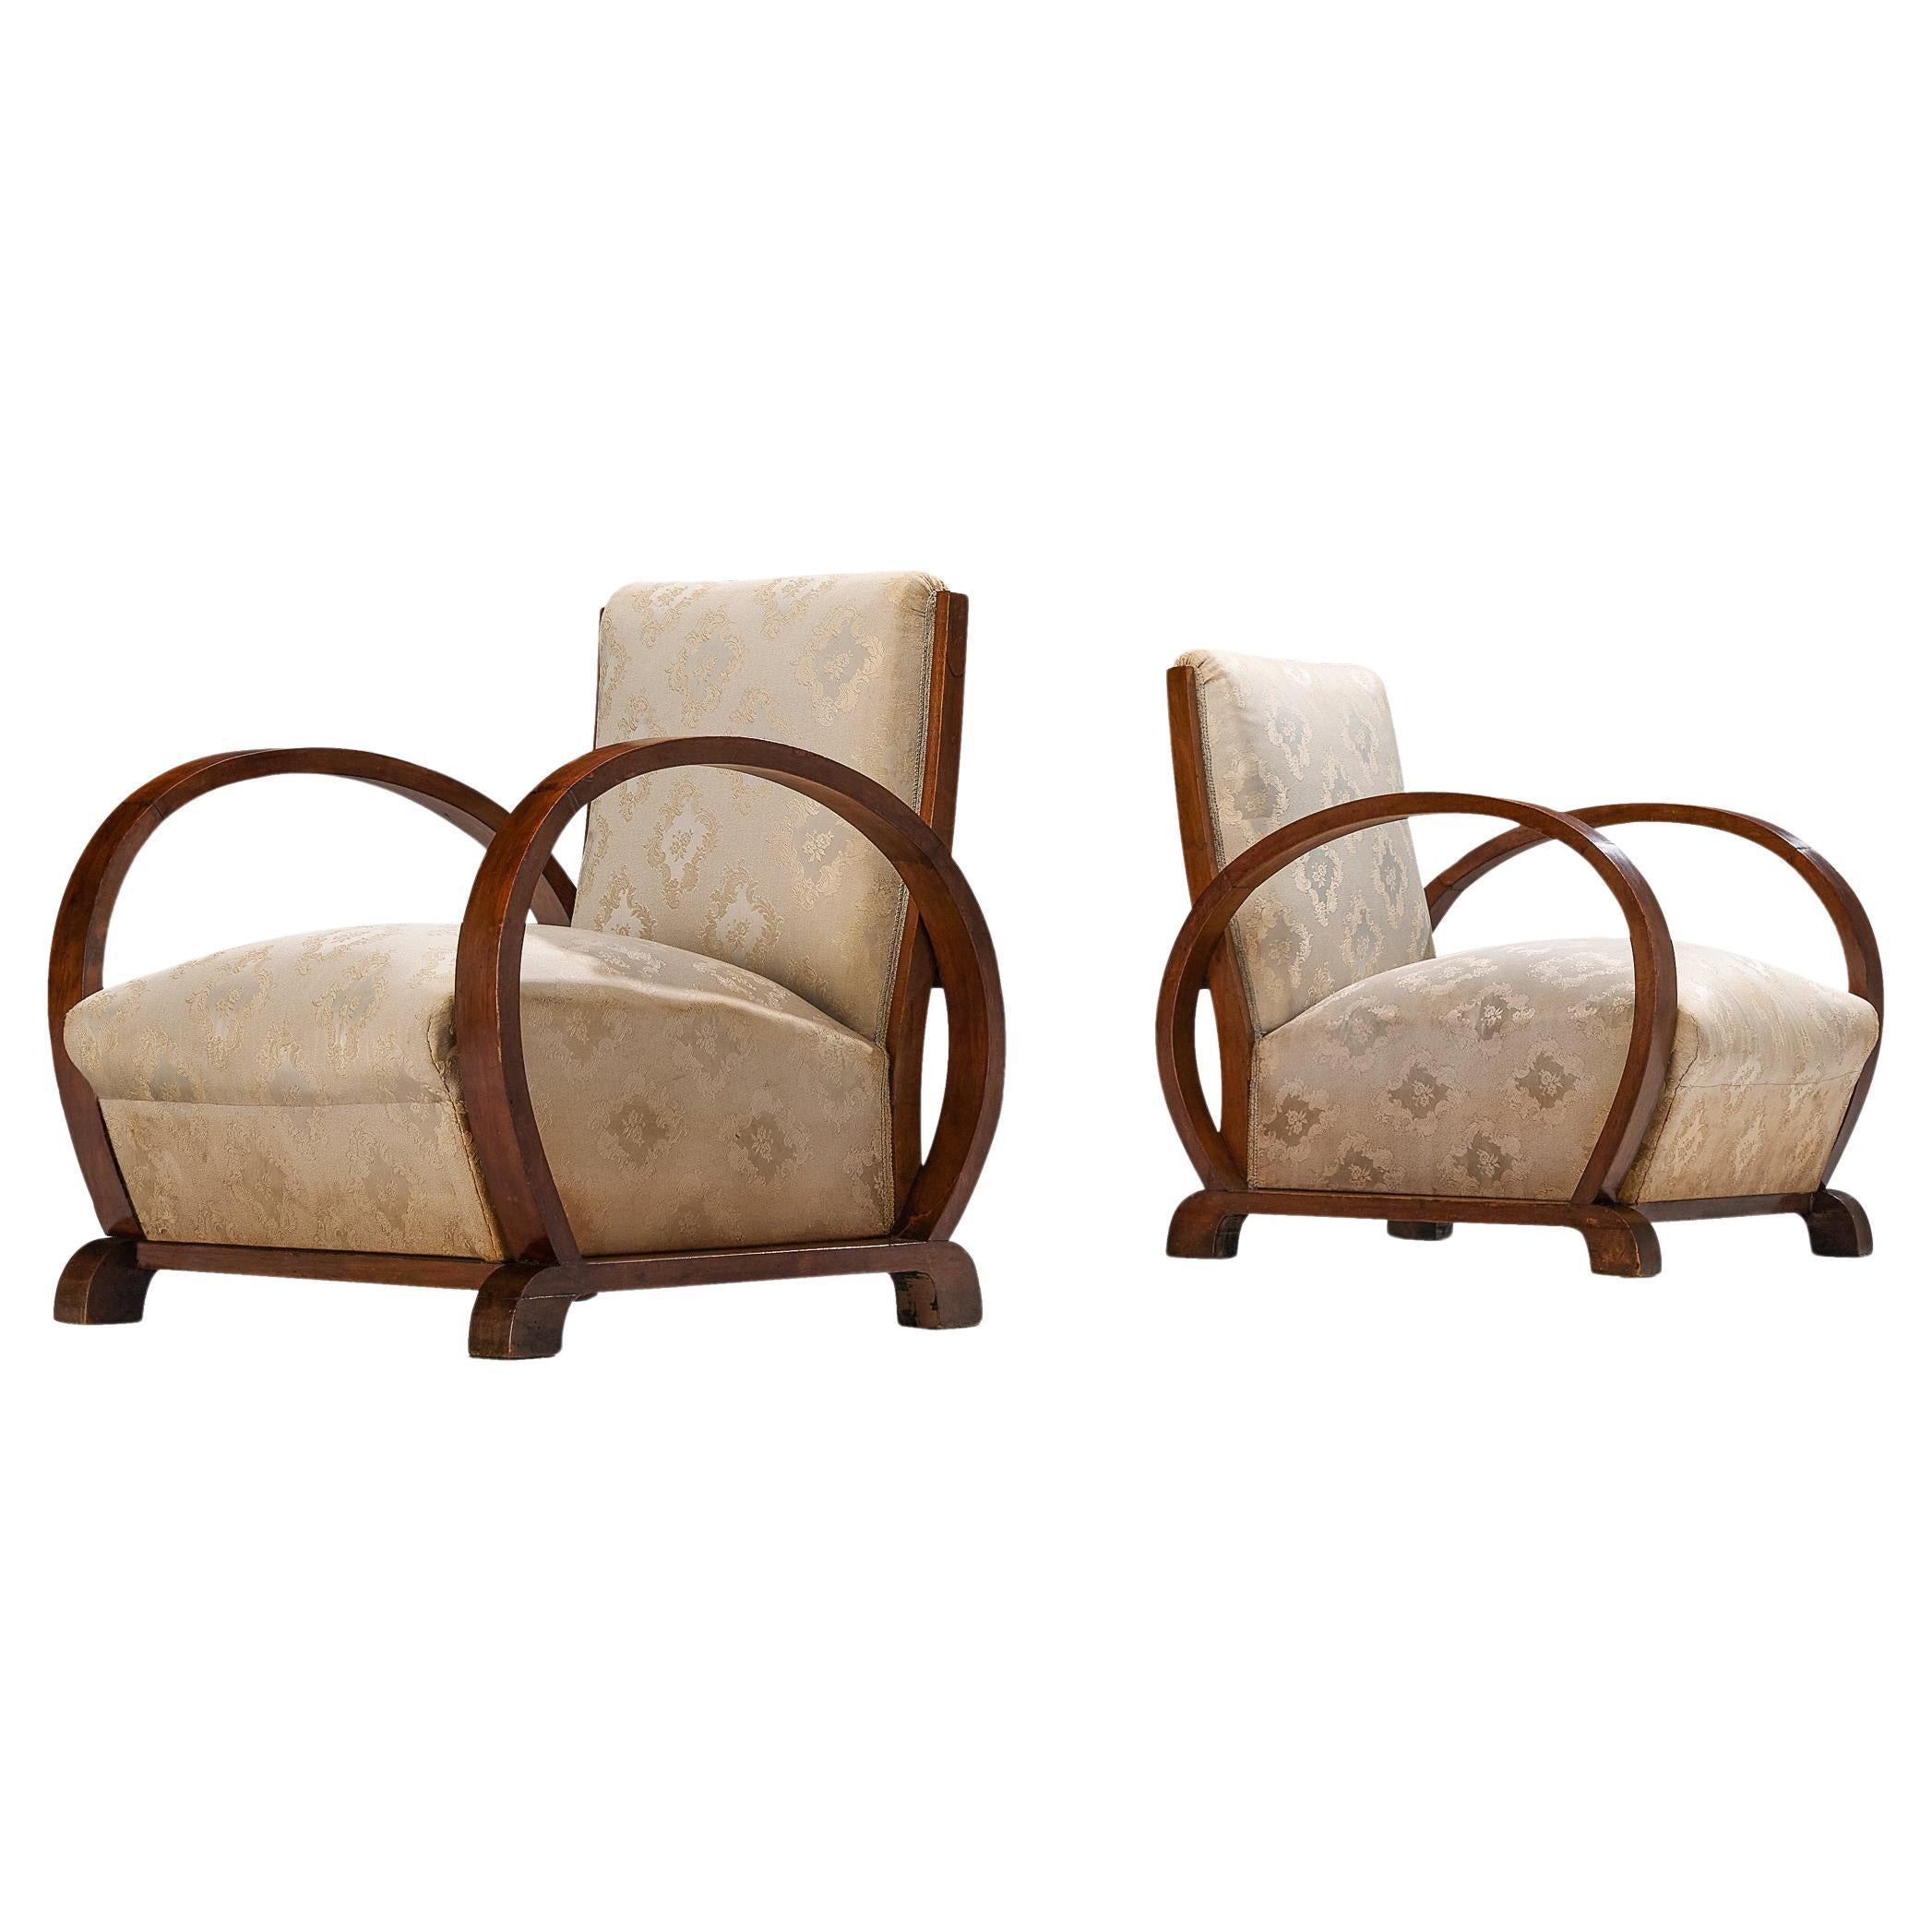 Art Deco Pair of Lounge Chairs in Walnut and Floral Upholstery  For Sale